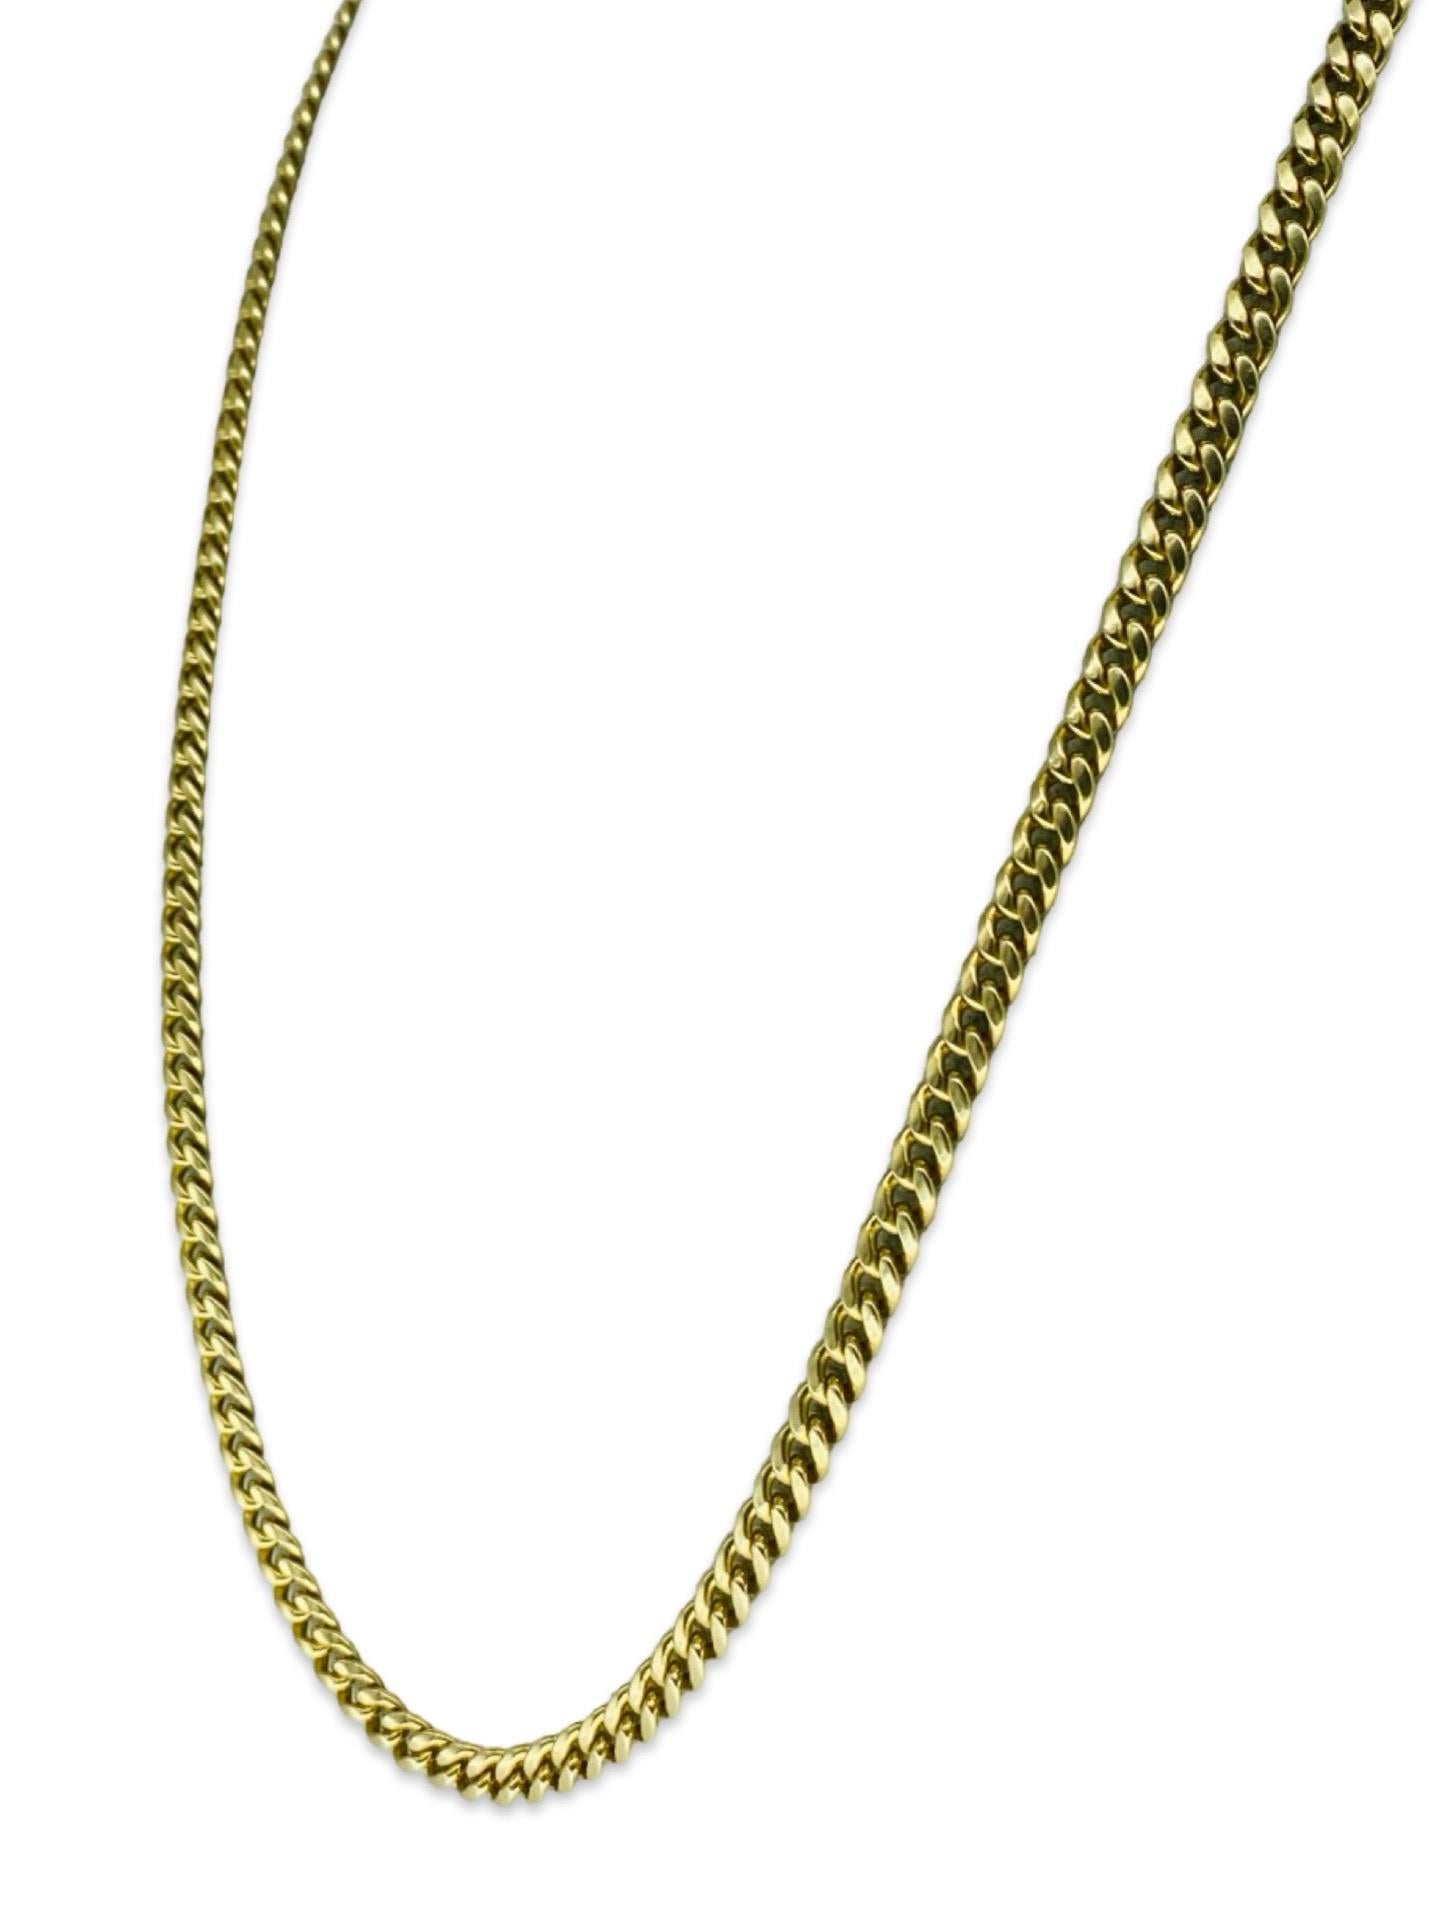 Women's or Men's Vintage 5.25mm Cuban Link Chain Solid Gold 14k Italy For Sale